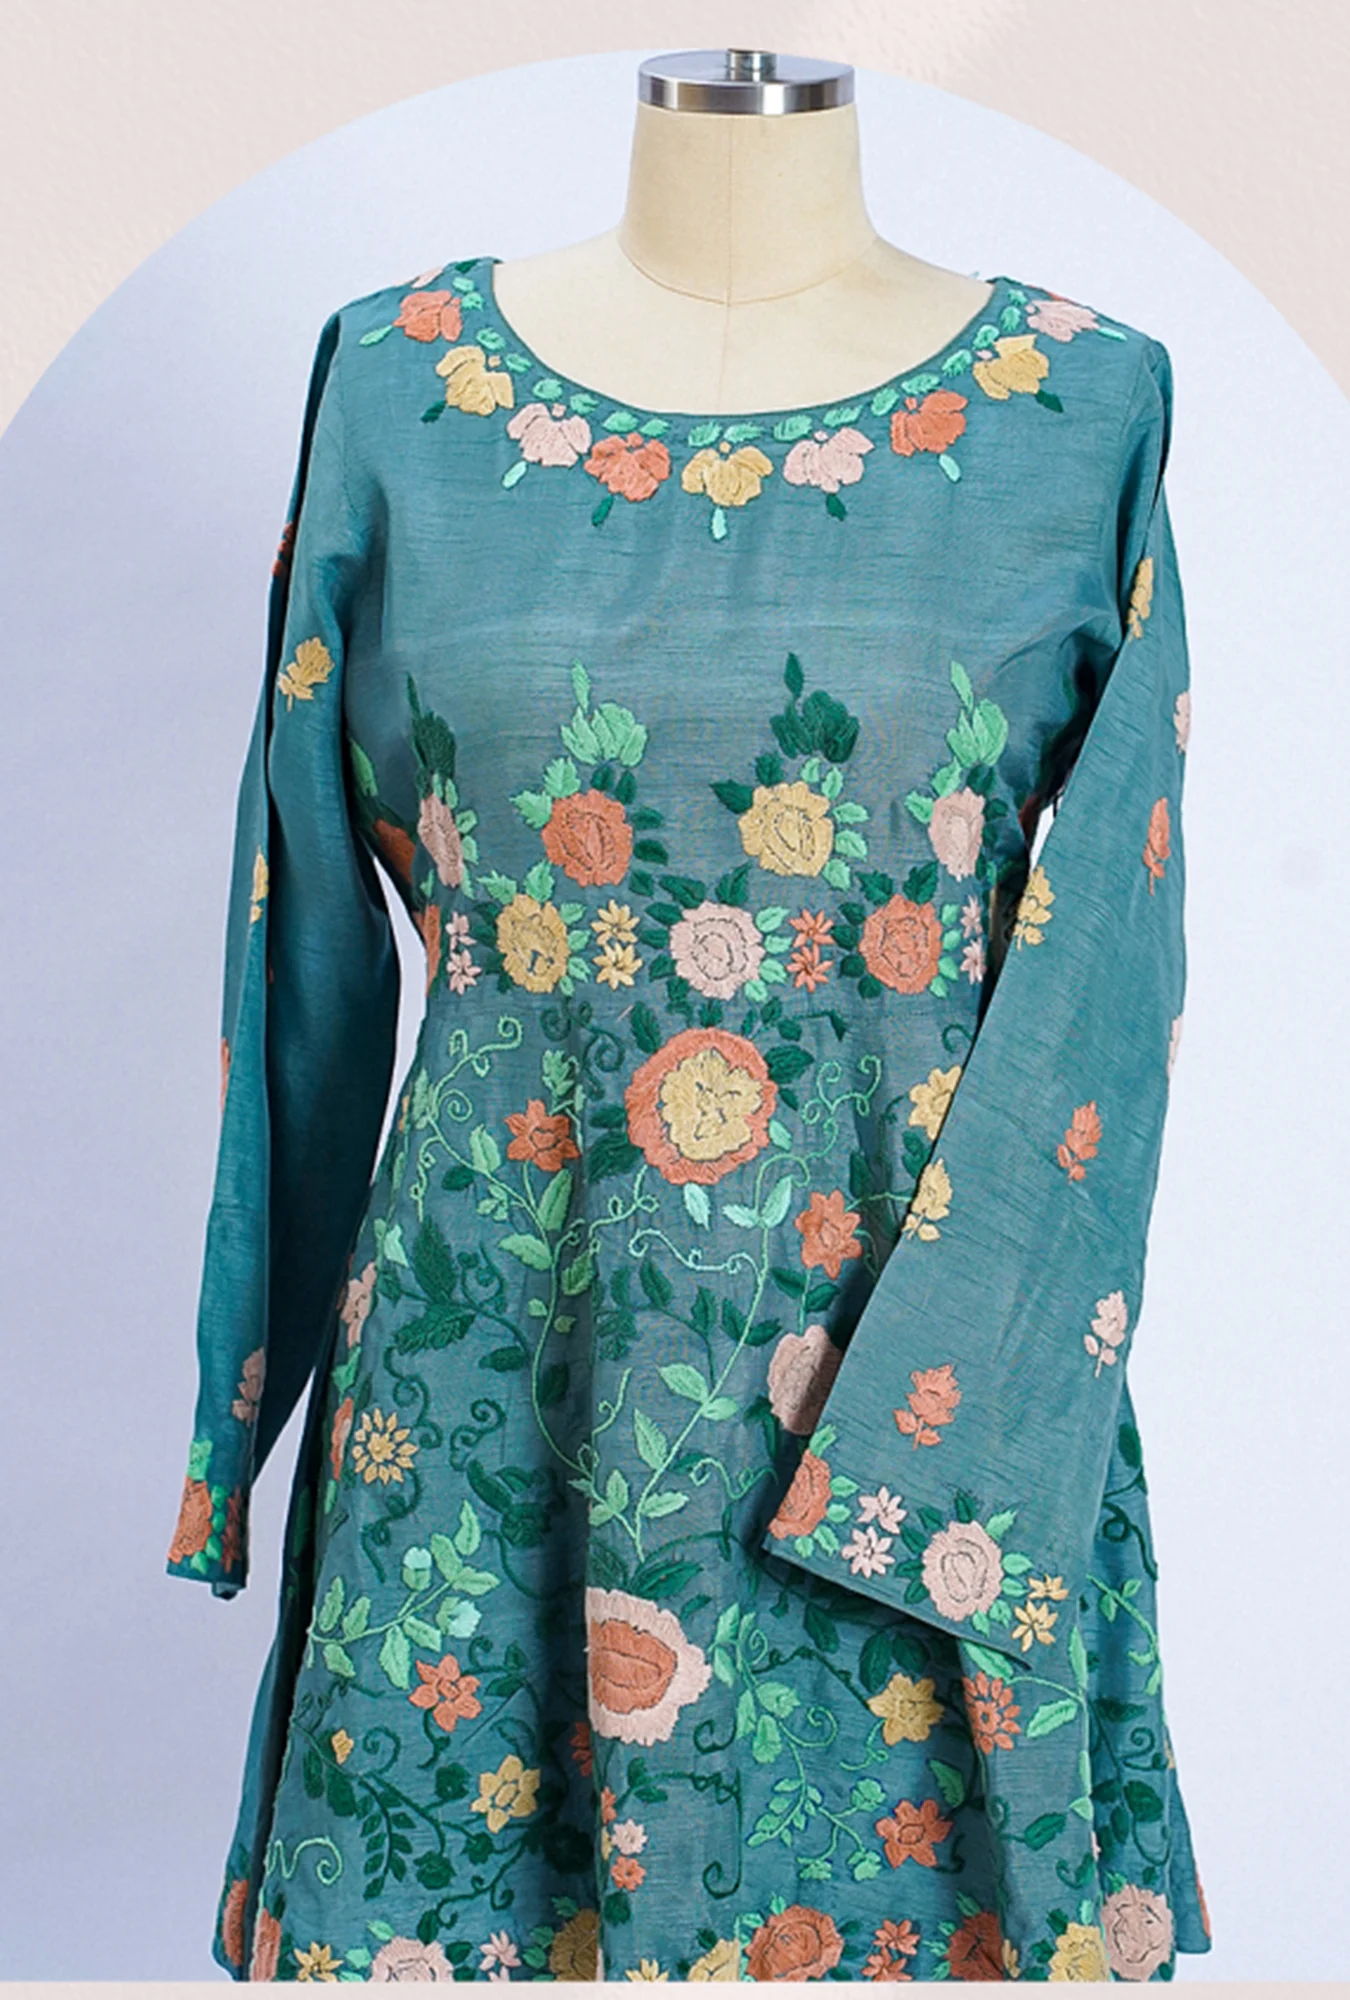 Short frock with fully floral embroidery